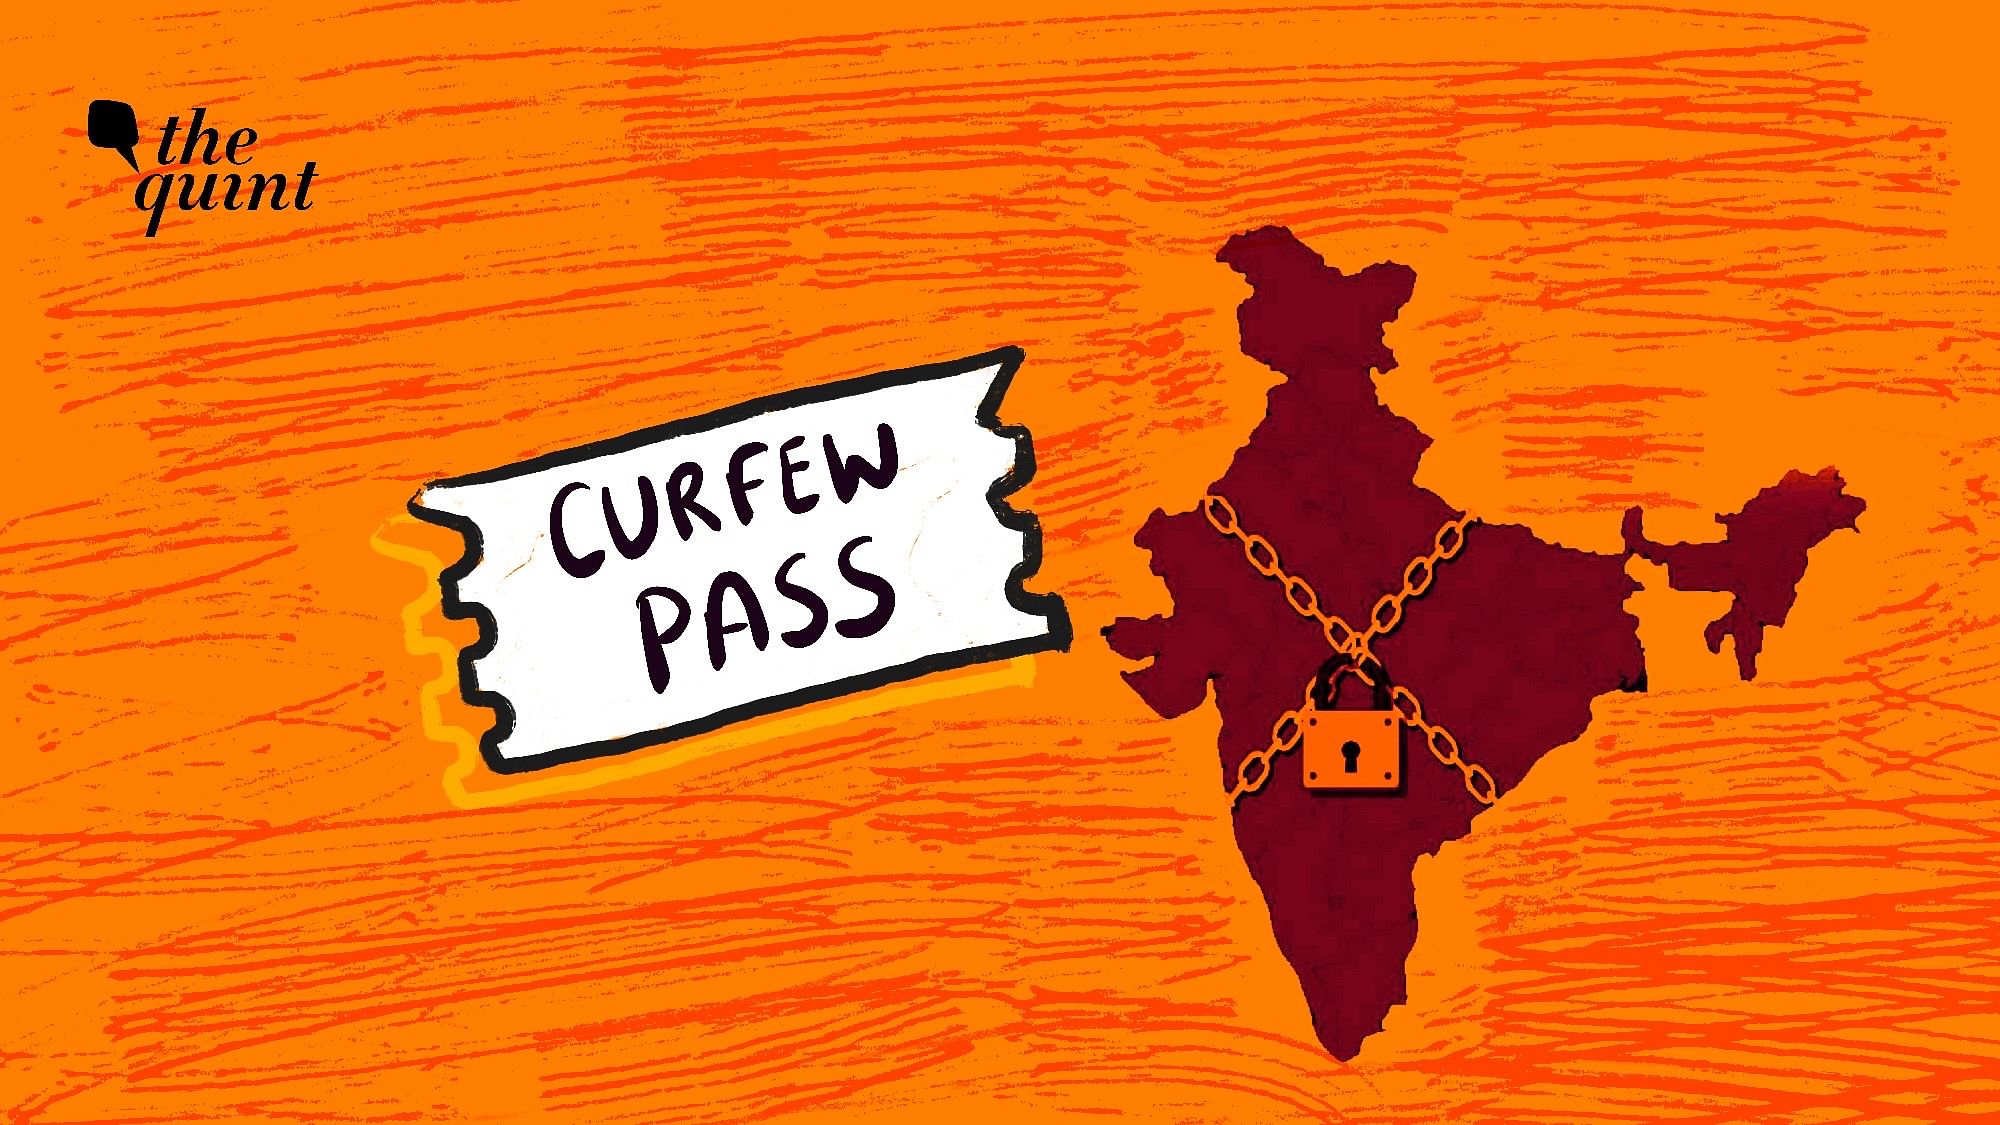 What we know about curfew passes and whether they are required in India during the coronavirus lockdown.